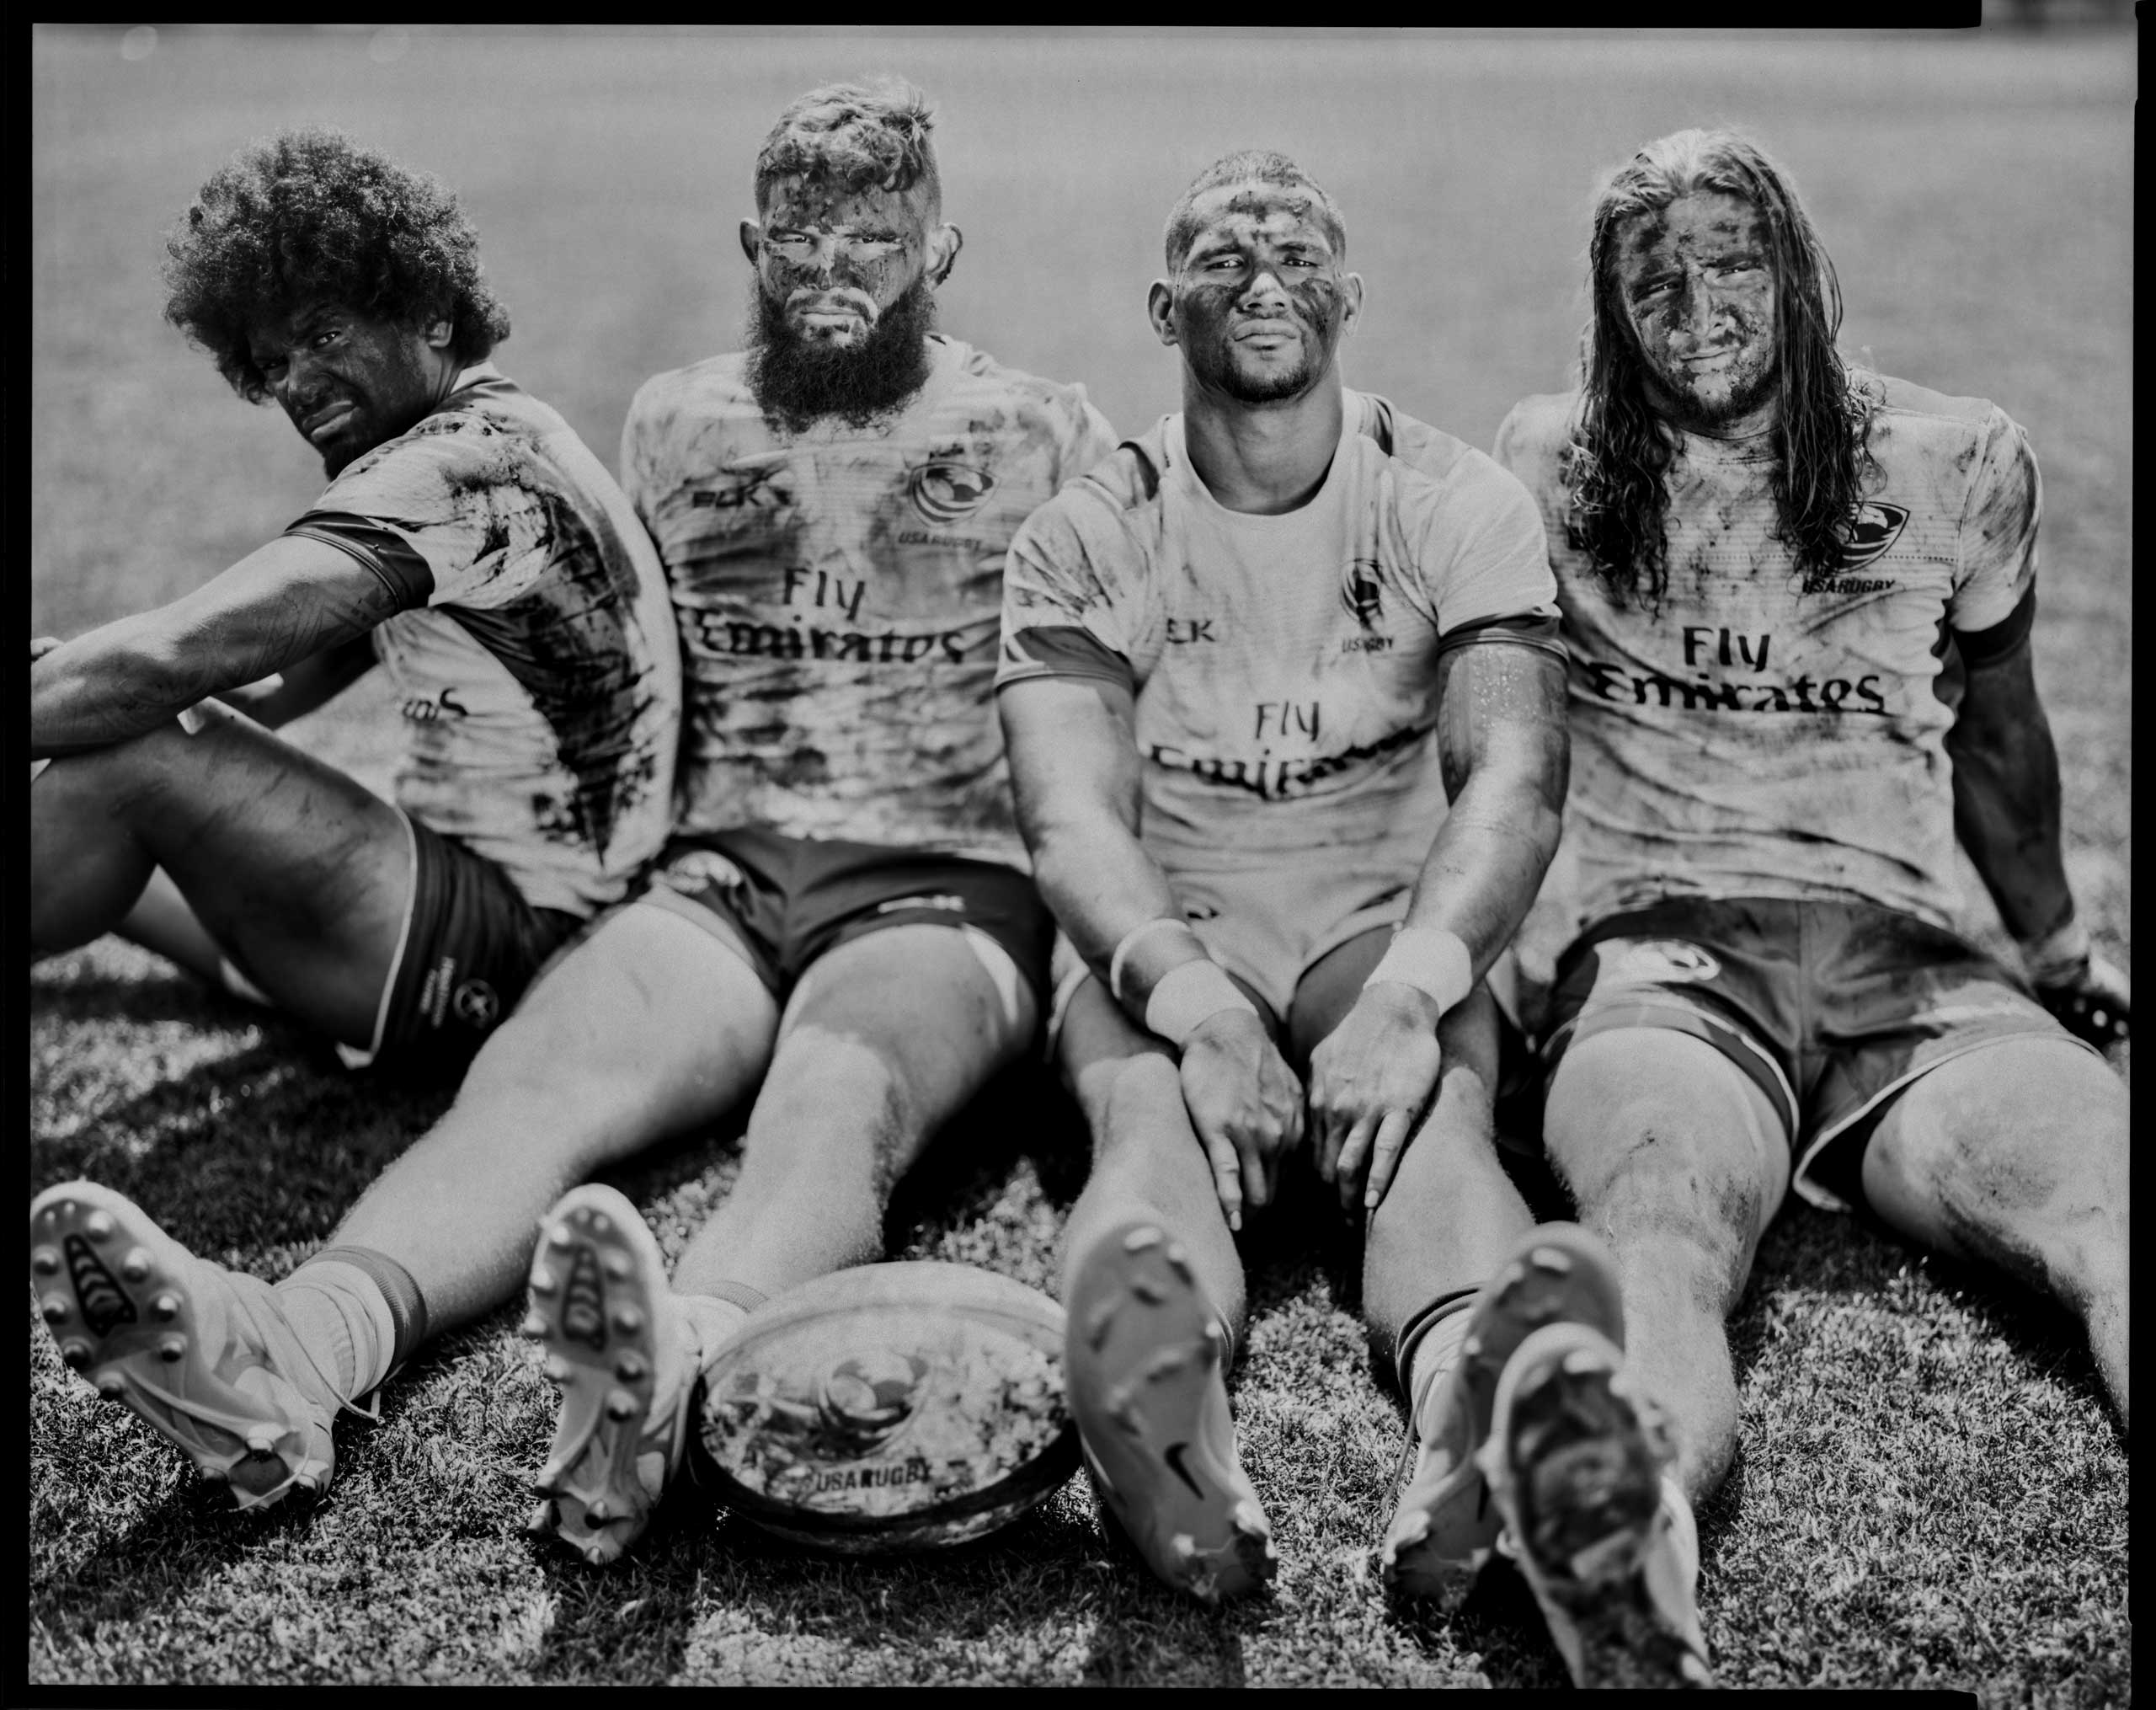 Folau Niua, Danny Berret, Martin Iosefo, and Garrett Bender will be part of the men's sevens US rugby team at the 2016 Rio Olympics and are photographed at the Olympic Training Center in Chula Vista, Calif.